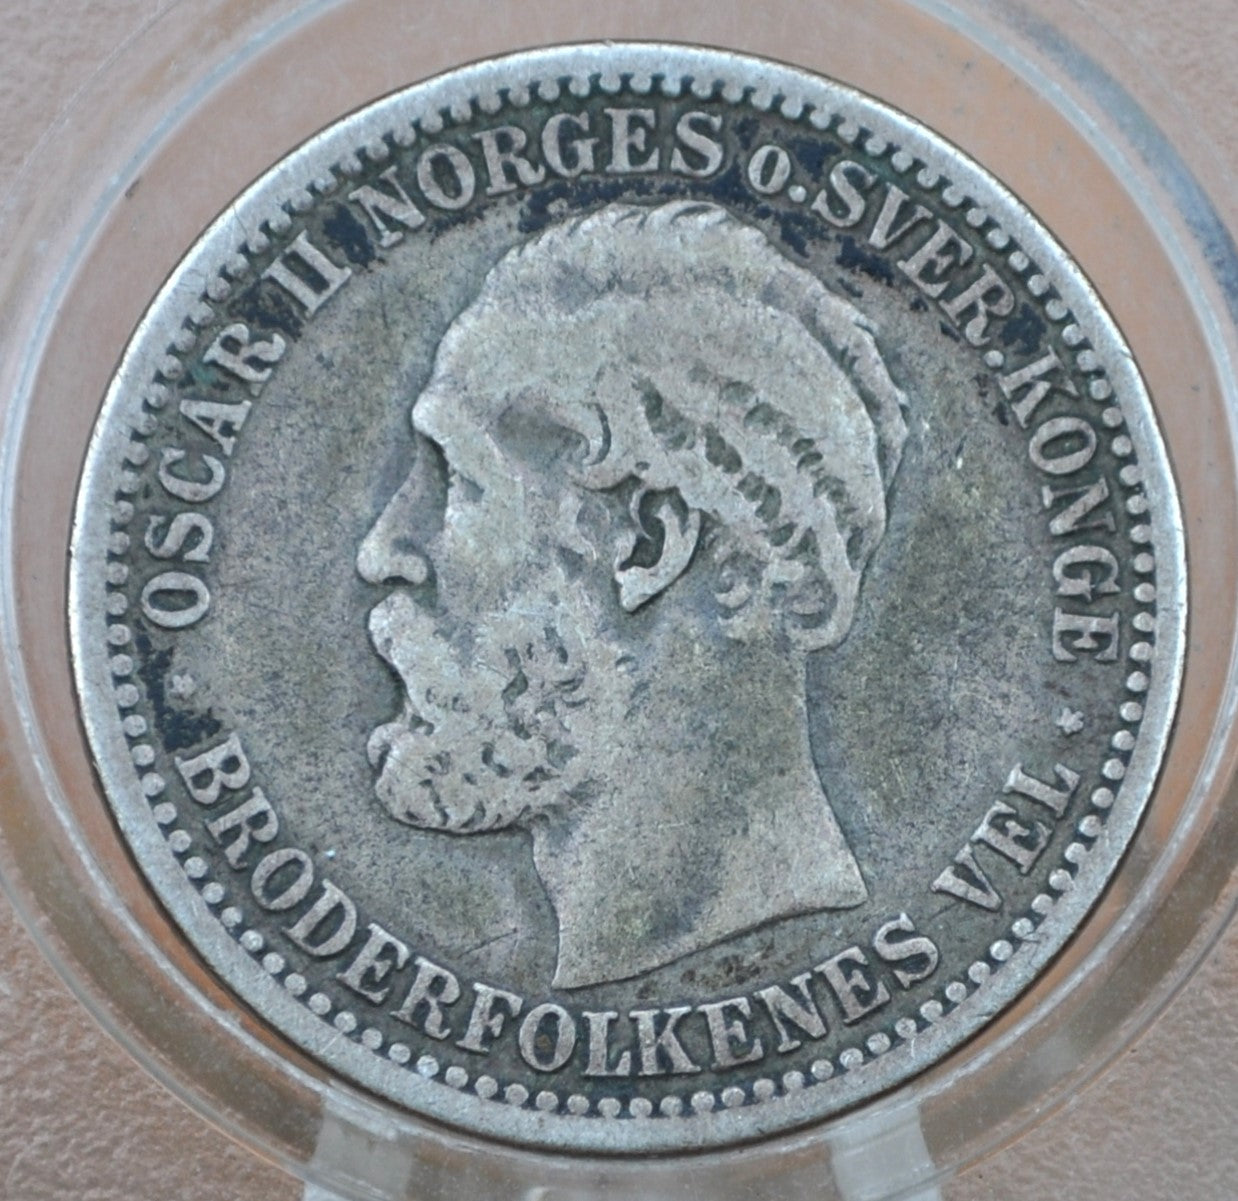 1899 Norway Silver 50 Ore Coin - Rare Date and Low Mintage, Only 200,000 made - Great Condition / Detail - Norwegian 50 Ore 1899 Silver